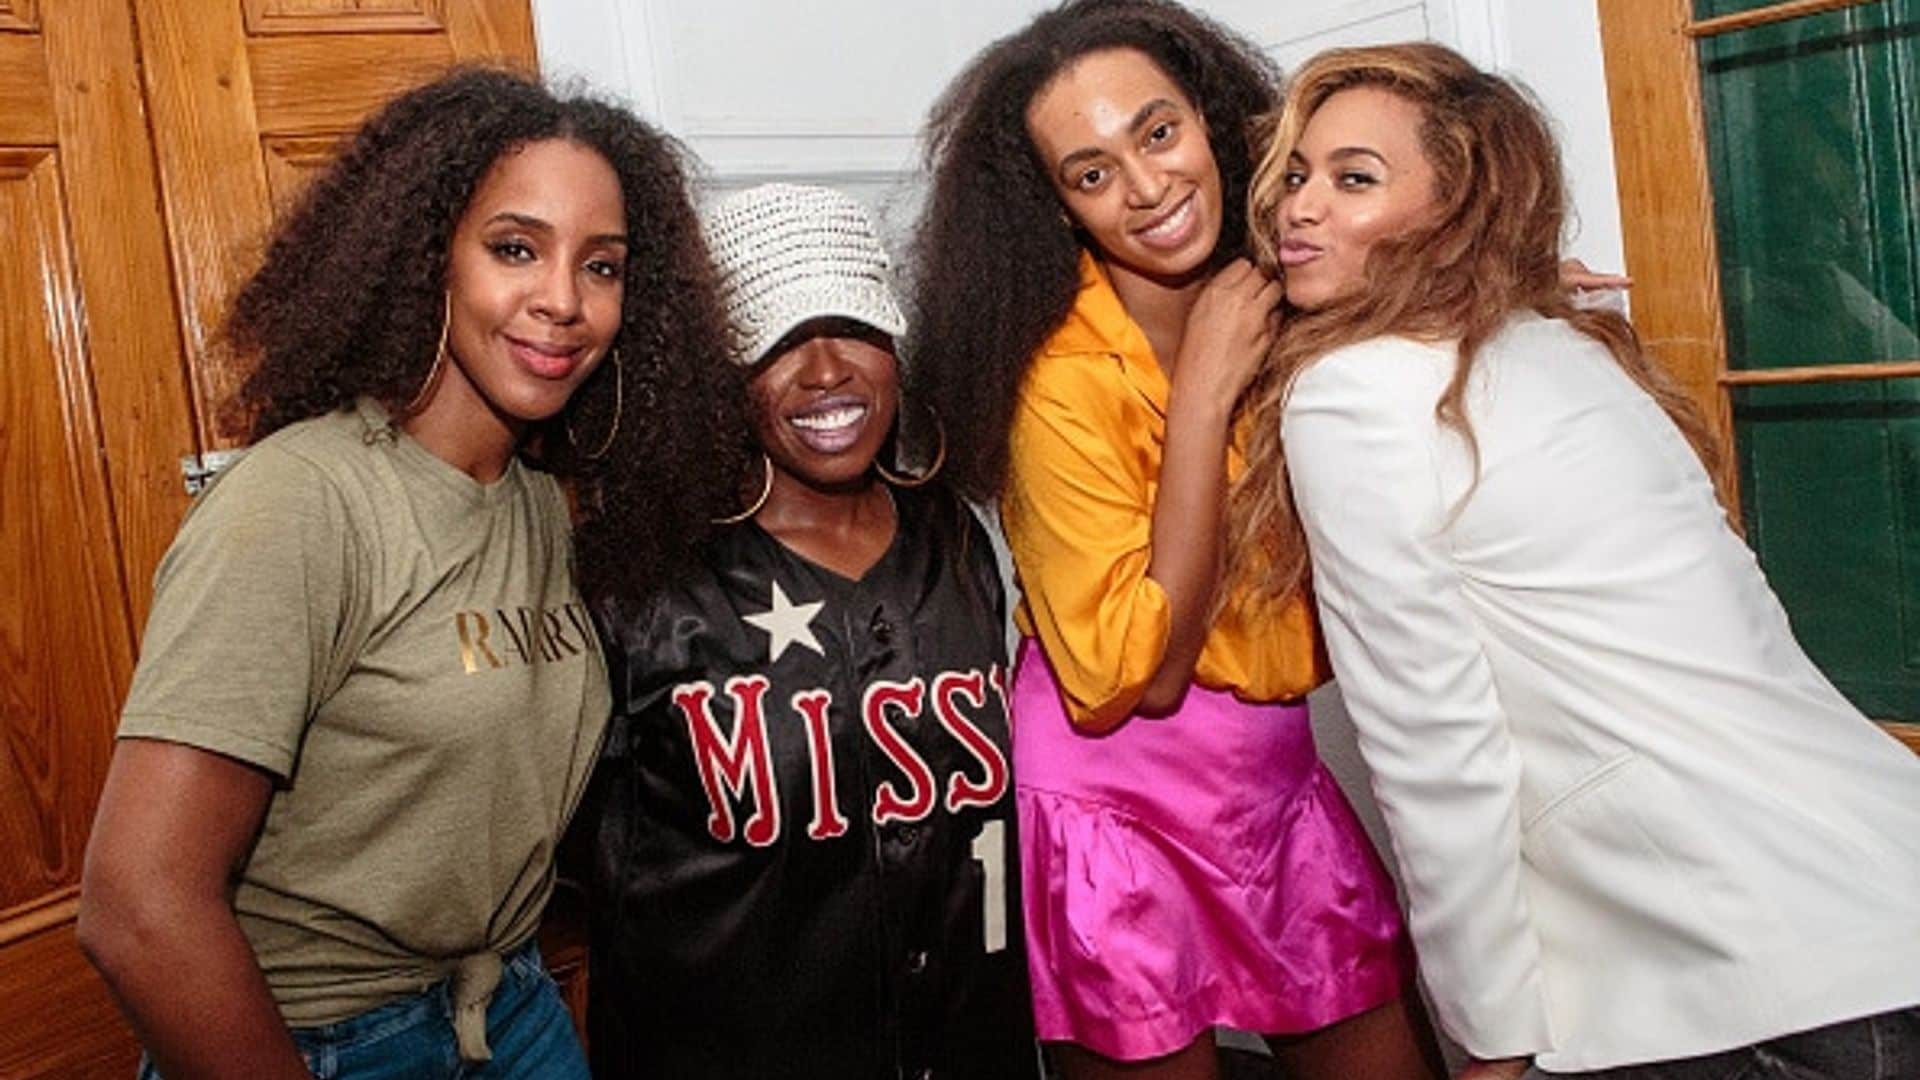 July 4: Supa Dupa Fly! Kelly Rowland, Solange and Beyonce joined Missy Elliott at St. Heron's '17 Wards' Weekend Wine & Grind party during the Essence Festival at Etoile Polaire No 1 in New Orleans.
Photo: Getty Images